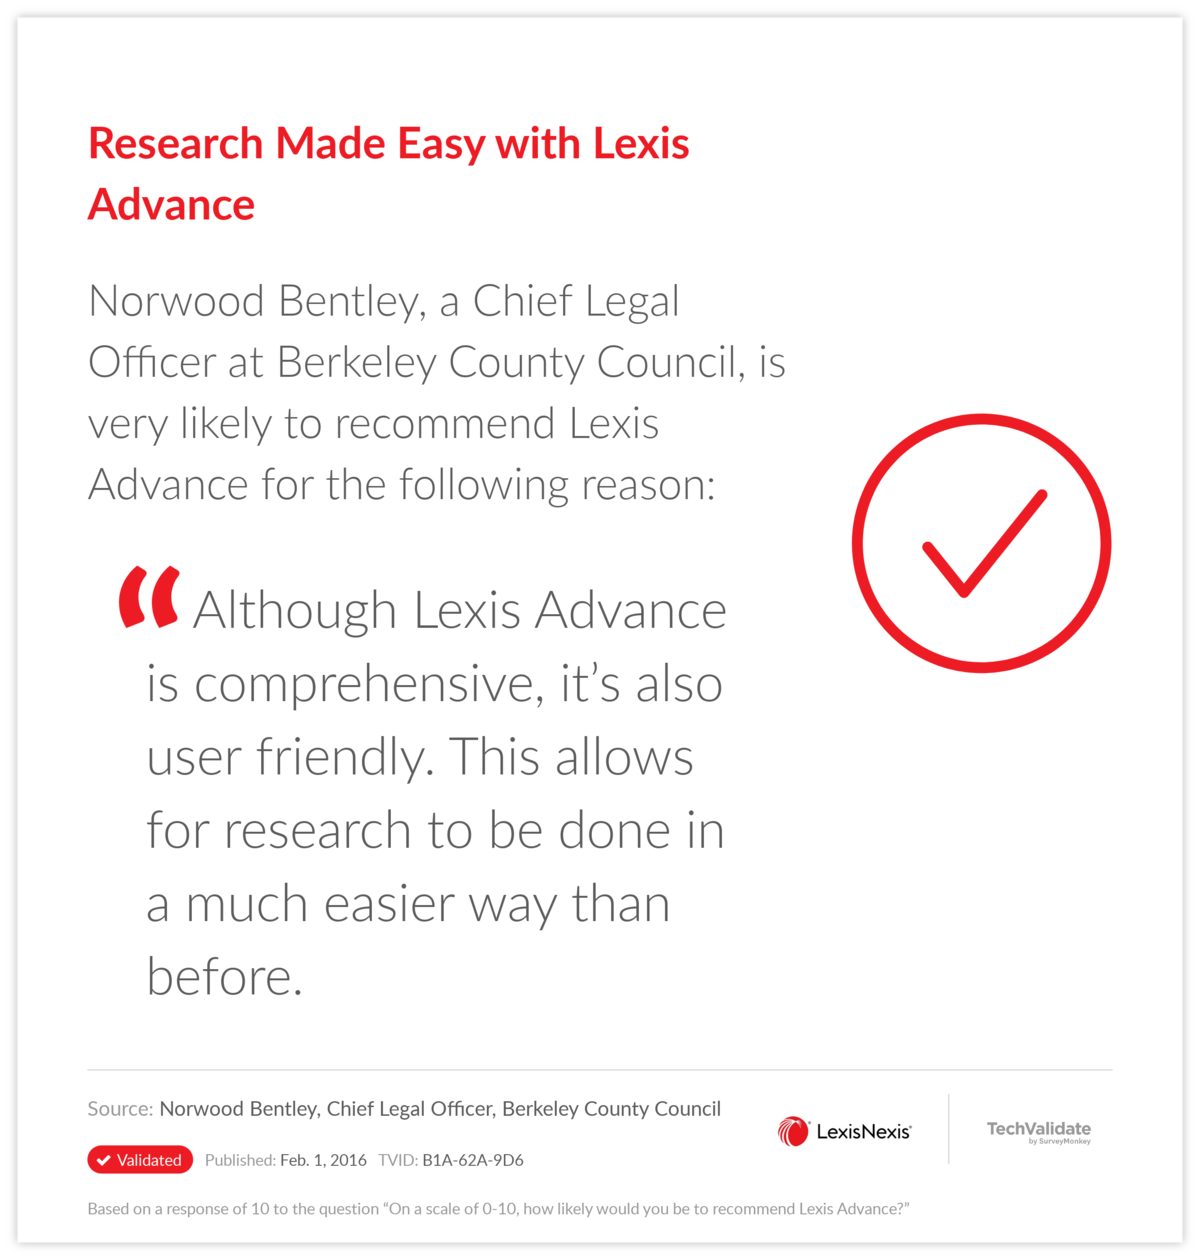 Research Made Easy with Lexis Advance